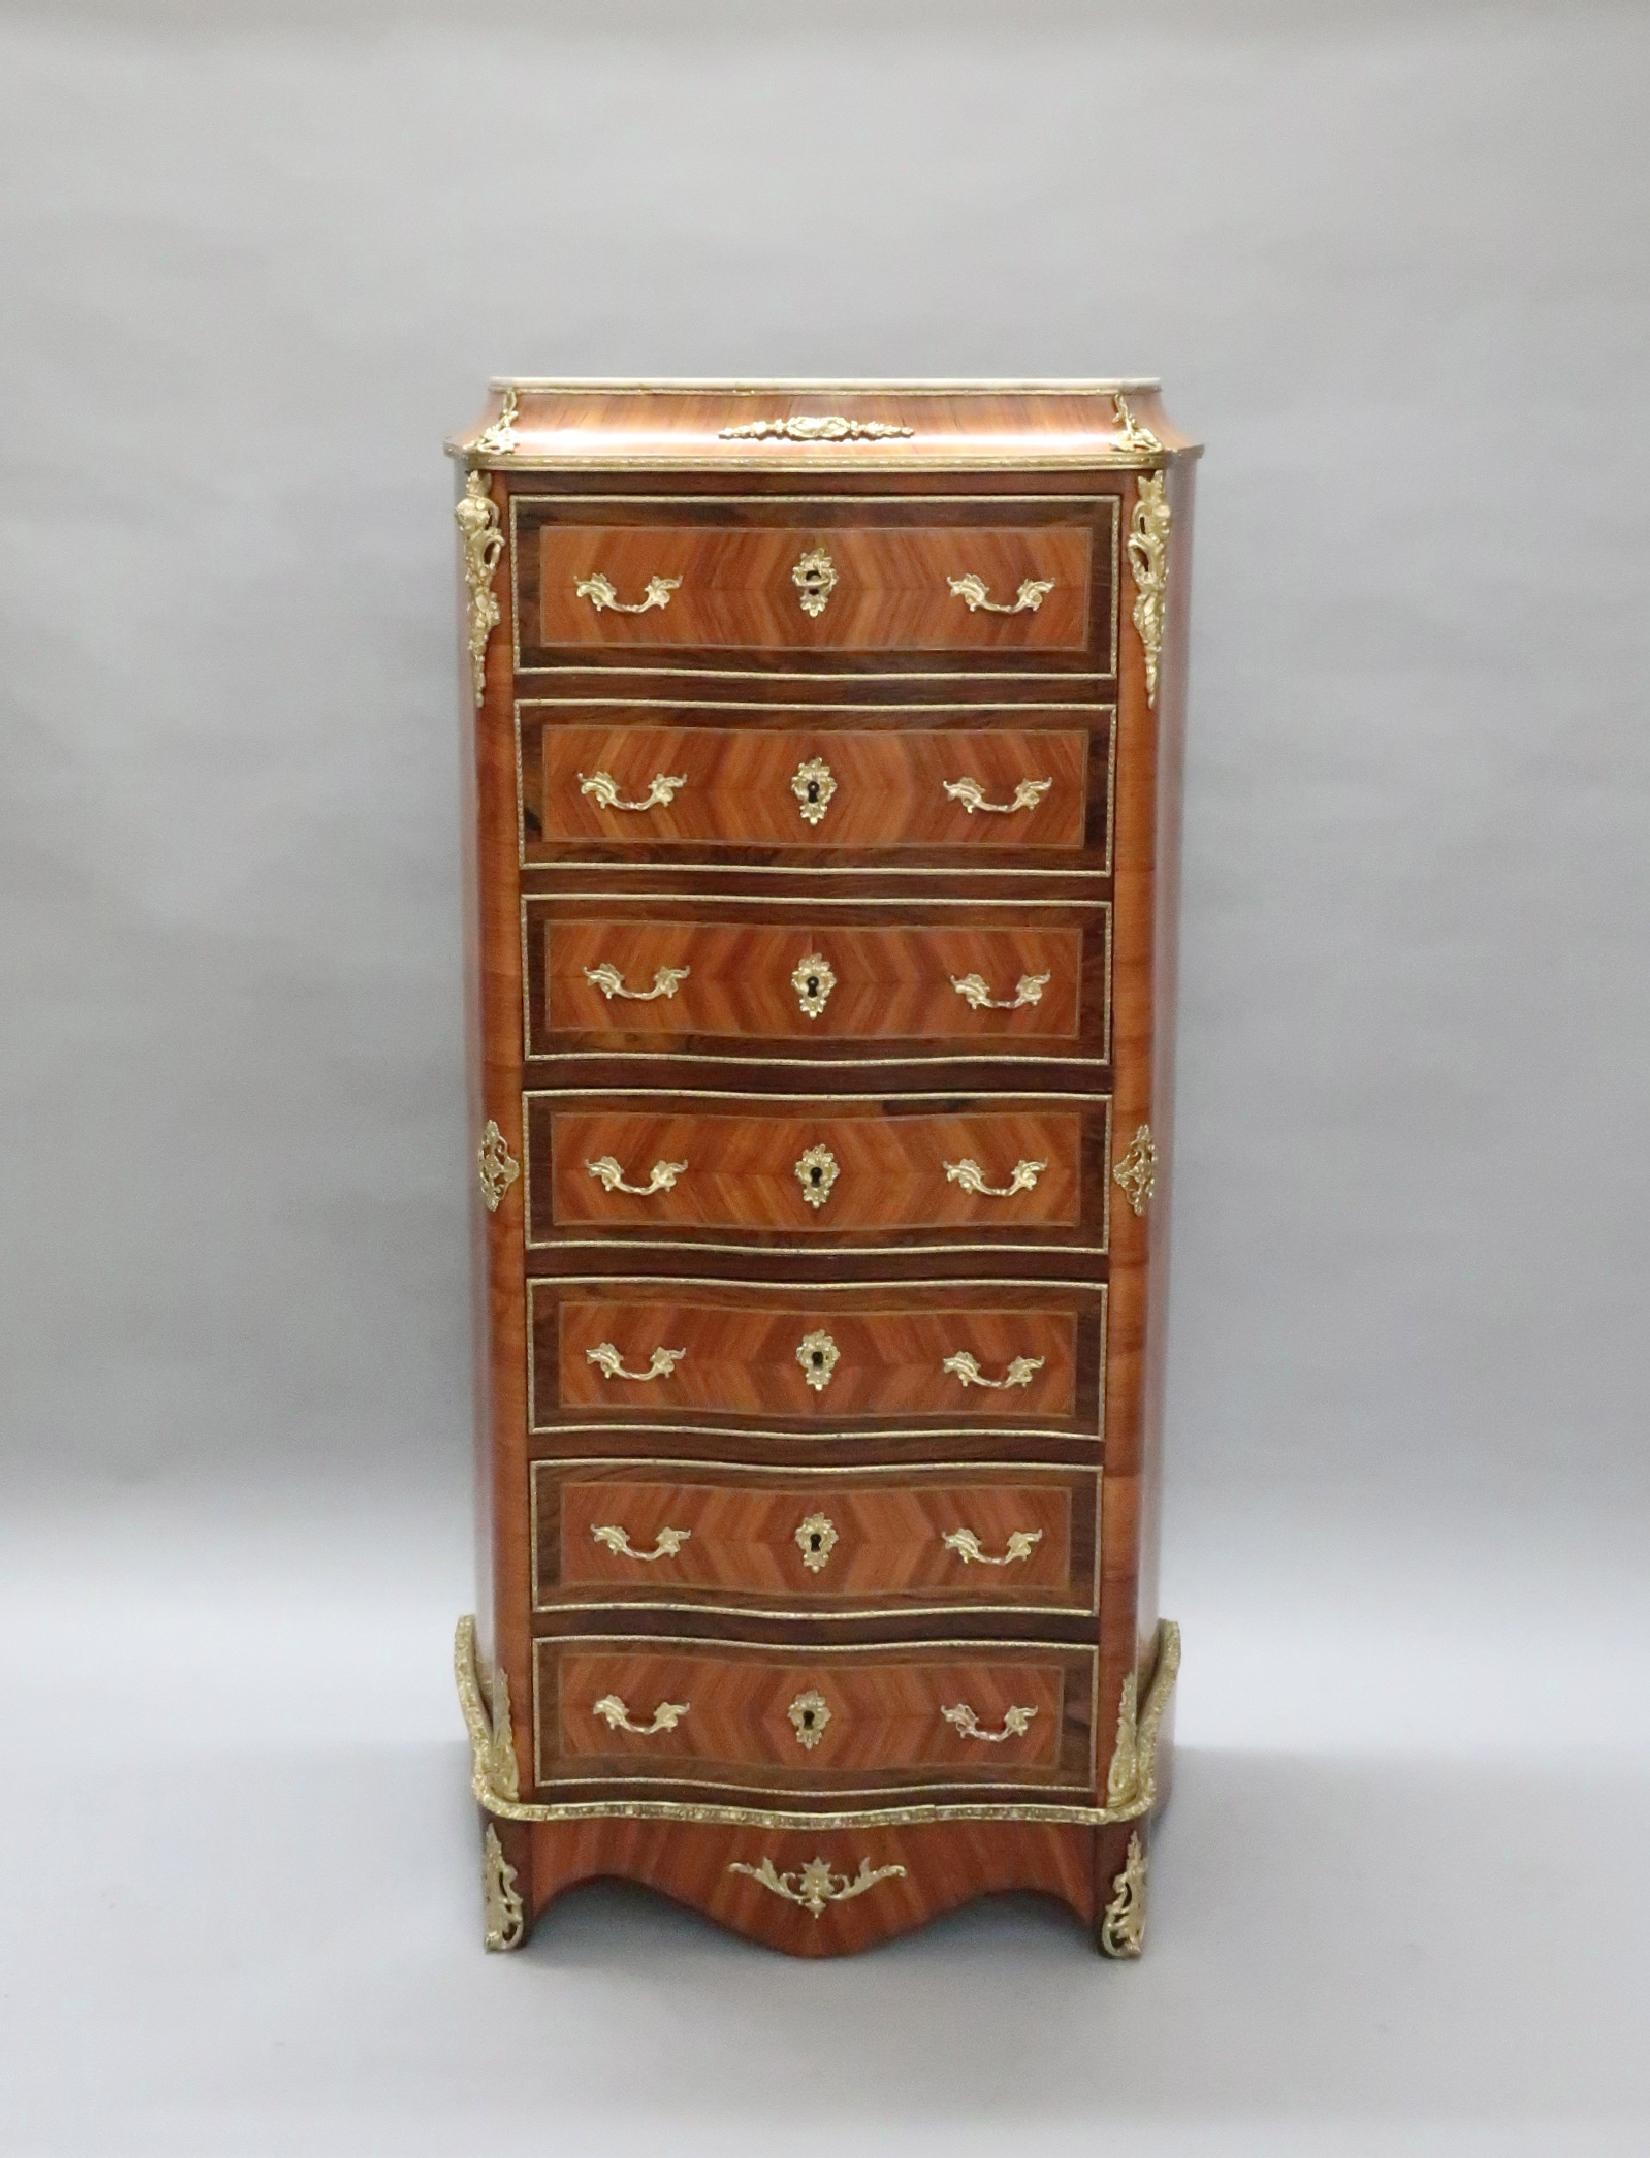 An extremely good quality French Louis XV style quarter veneered feather banded tulip wood and king wood banded serpentine shaped escritoire writing cabinet still retaining its original white Carrara marble-top. The cabinet has bronze gilt ormolu